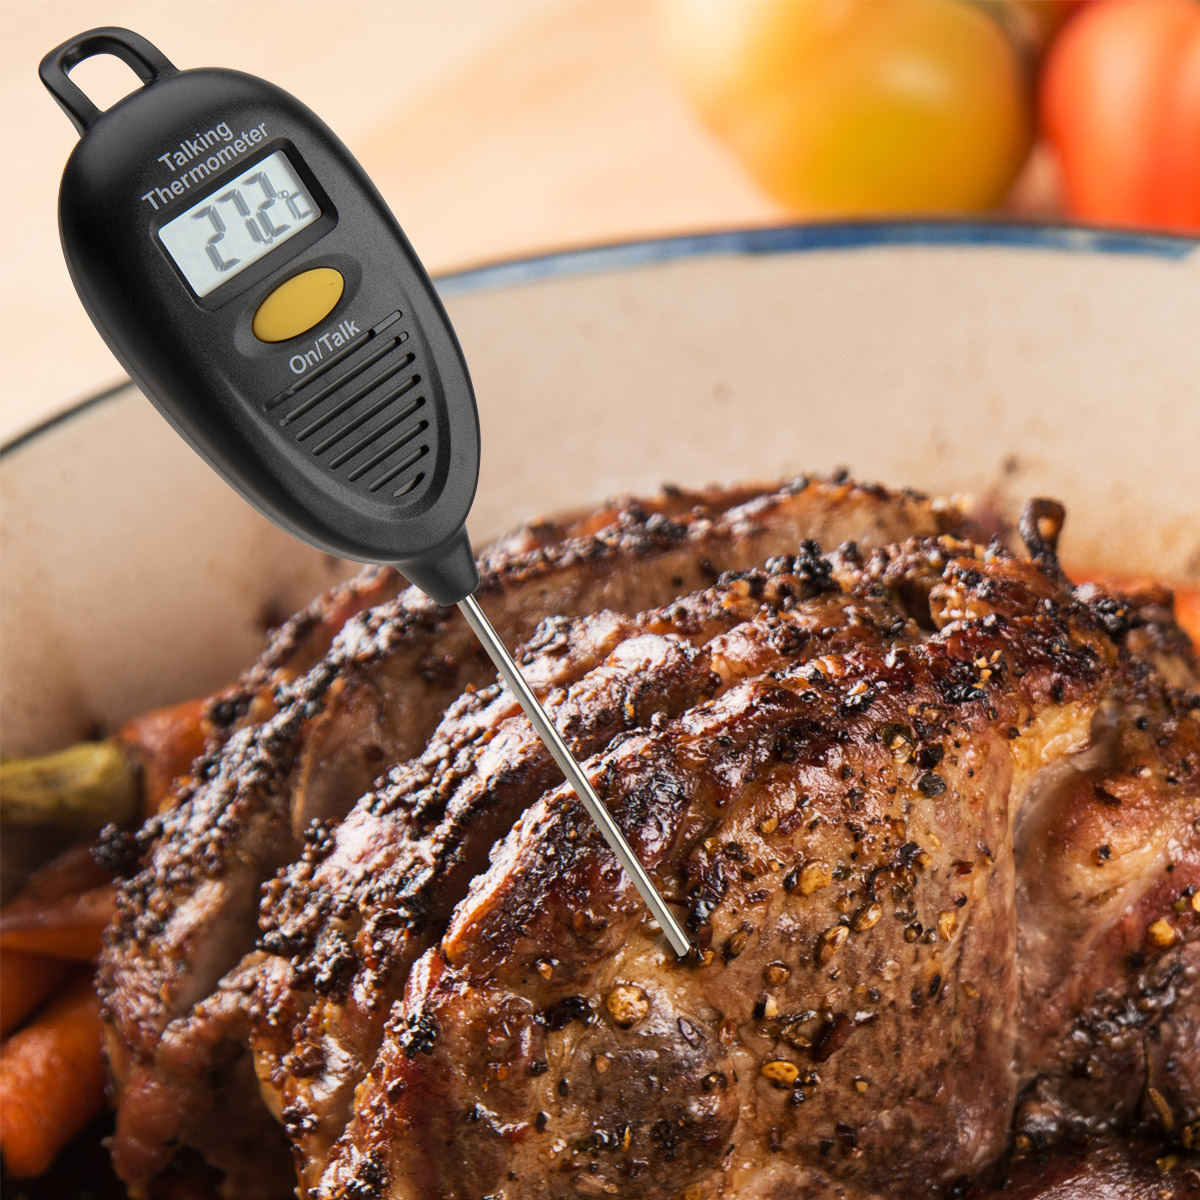 https://www.seedifferently.org.au/wp-content/uploads/2020/11/LV1833016-Talking-Food-Thermometer-B.jpg